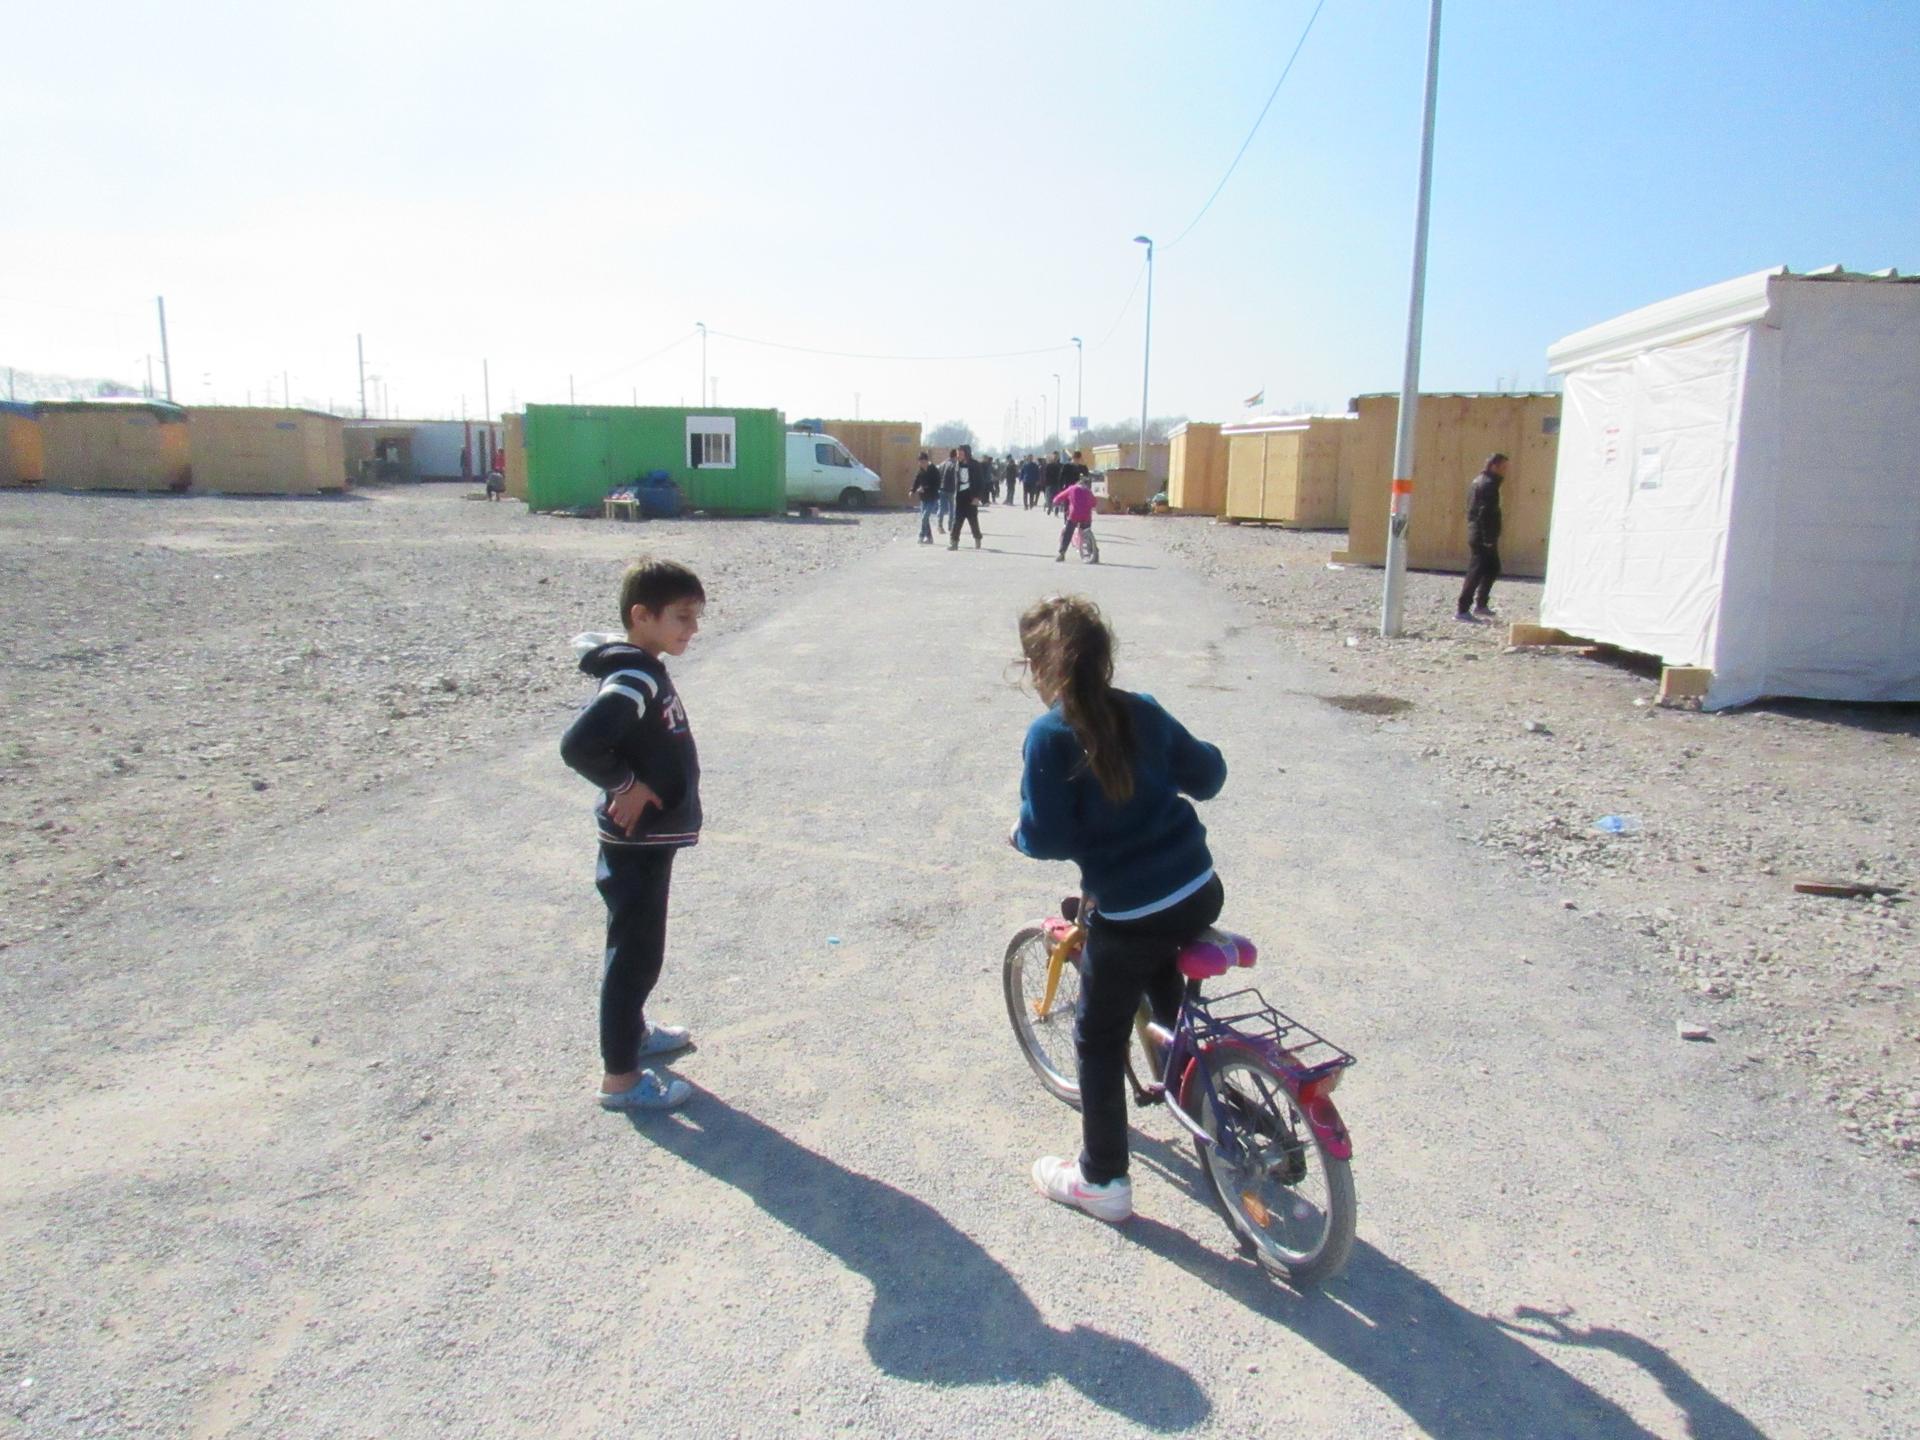 Children play on the main road at the new migrant camp in Grand-Synthe.